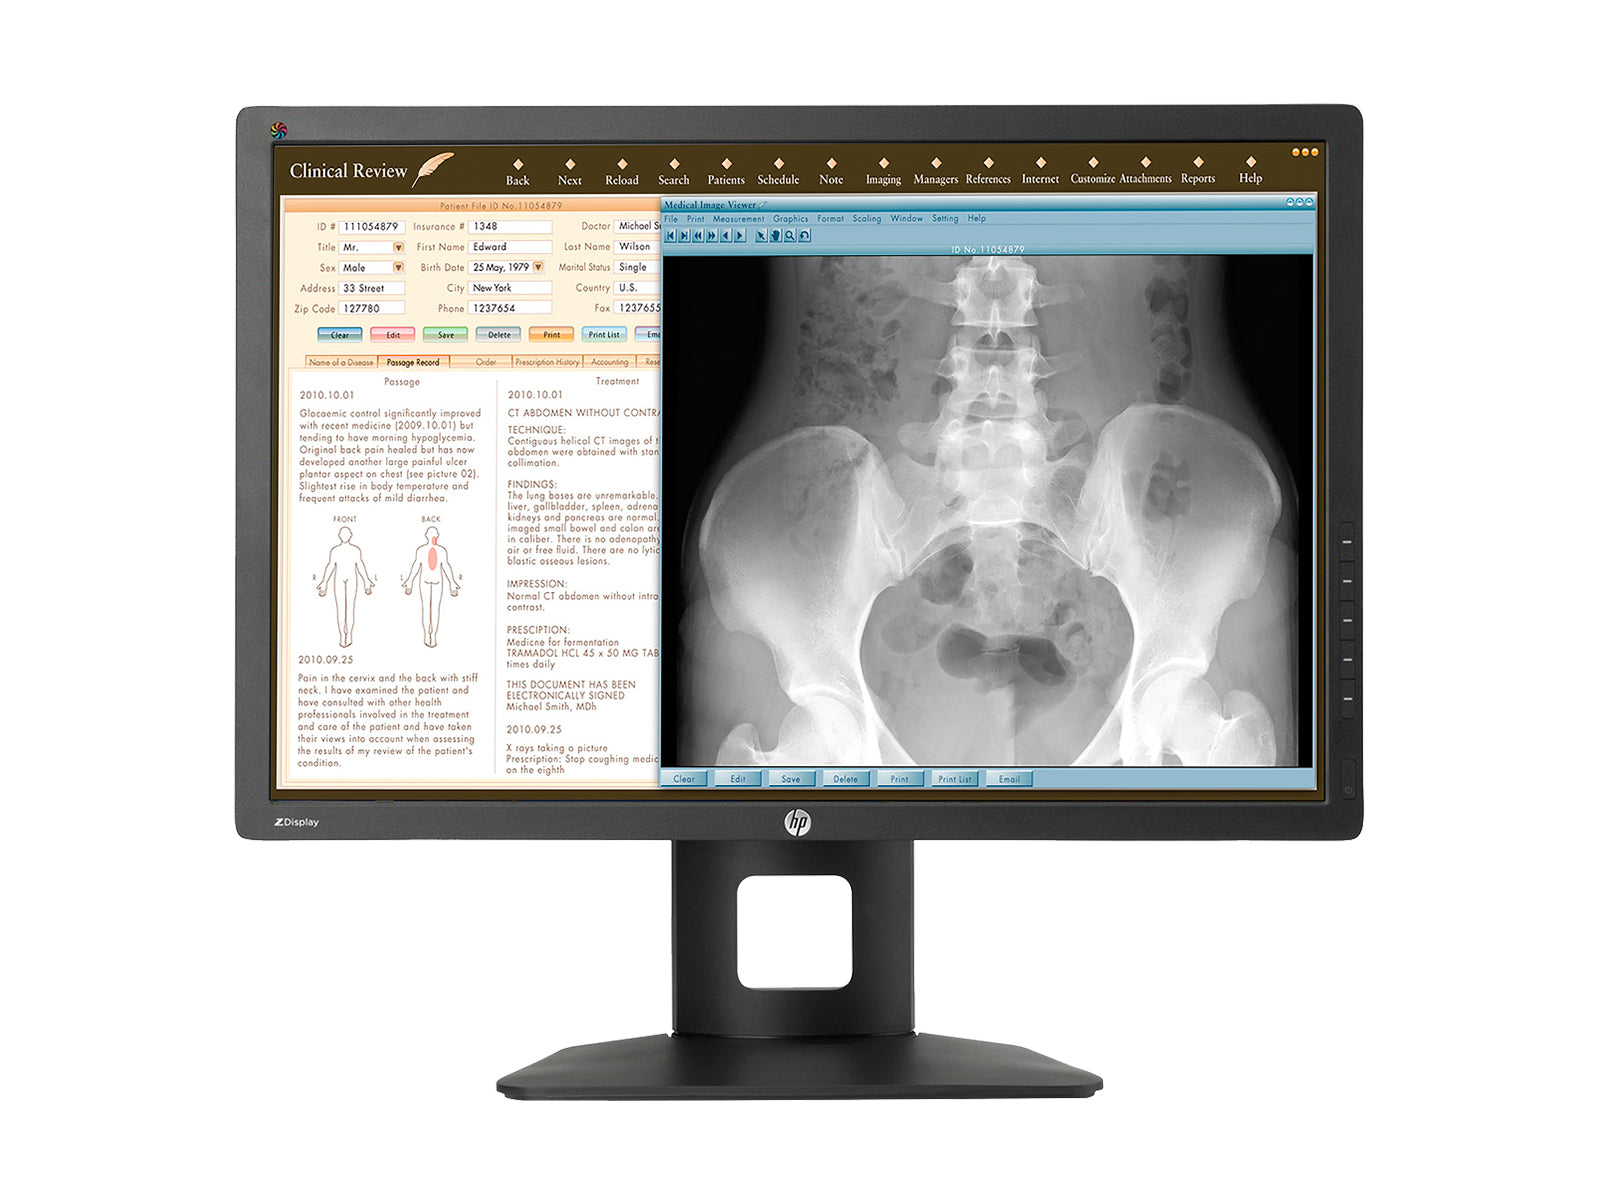 Complete PACS General Radiology Station | Barco 3MP Grayscale LED Displays | Dell Workstation | Dictation Mic | Worklist Monitor (3221T5820R) Monitors.com 